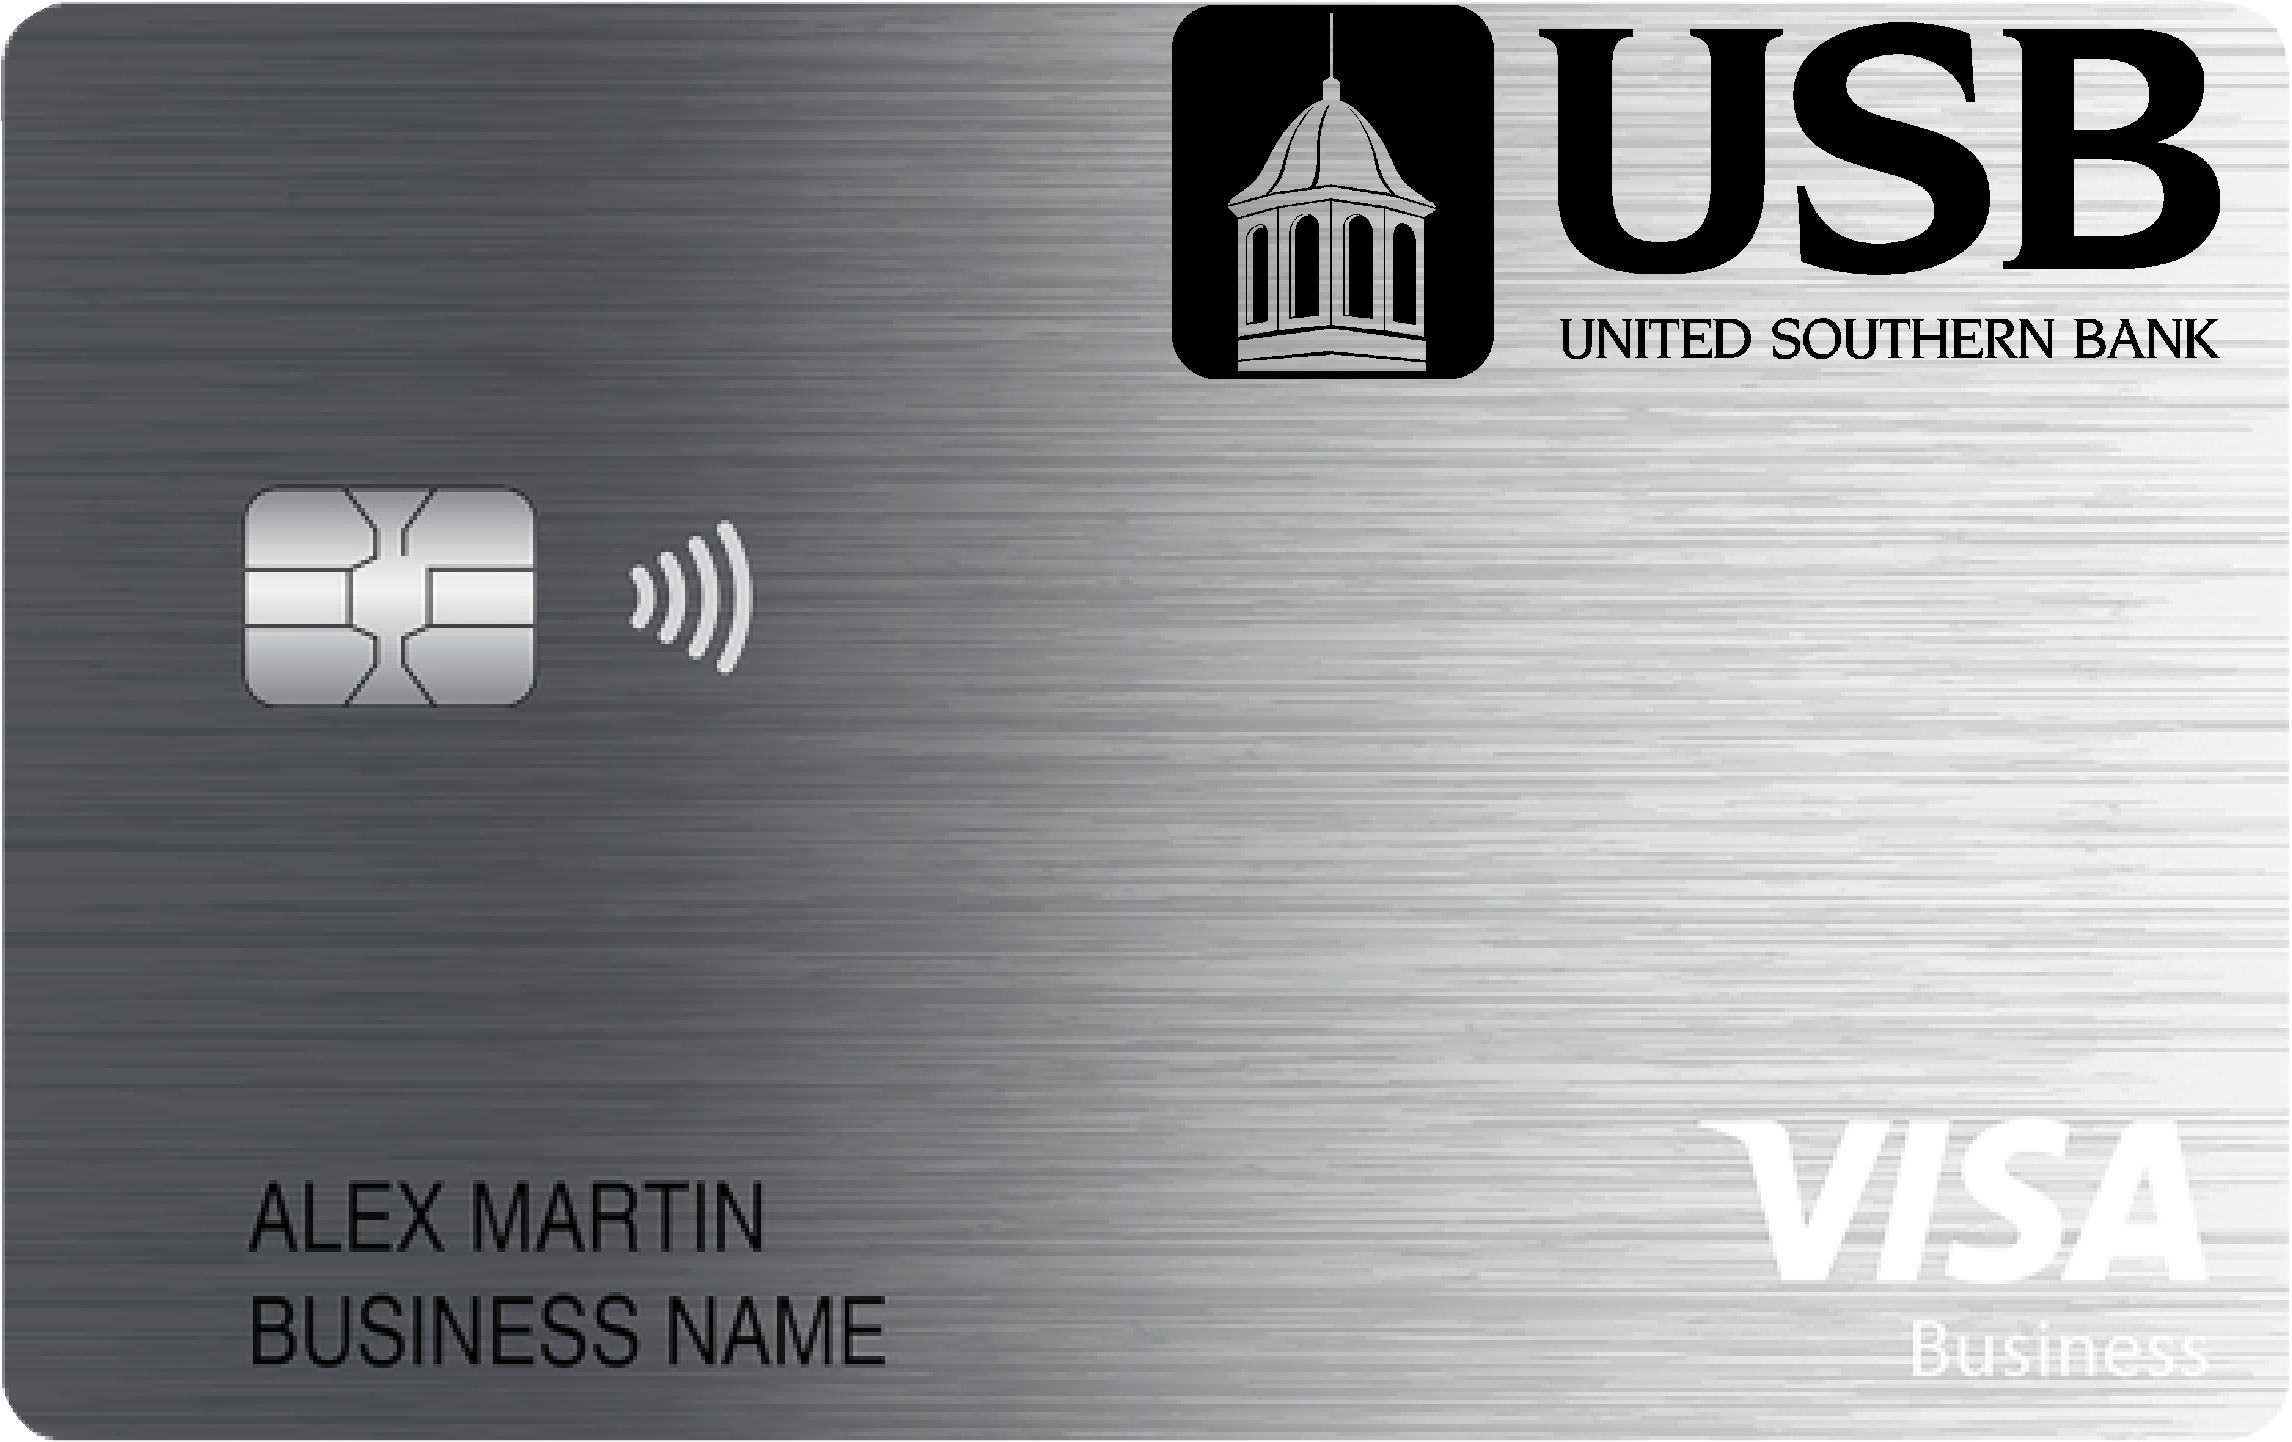 United Southern Bank Business Cash Preferred Card